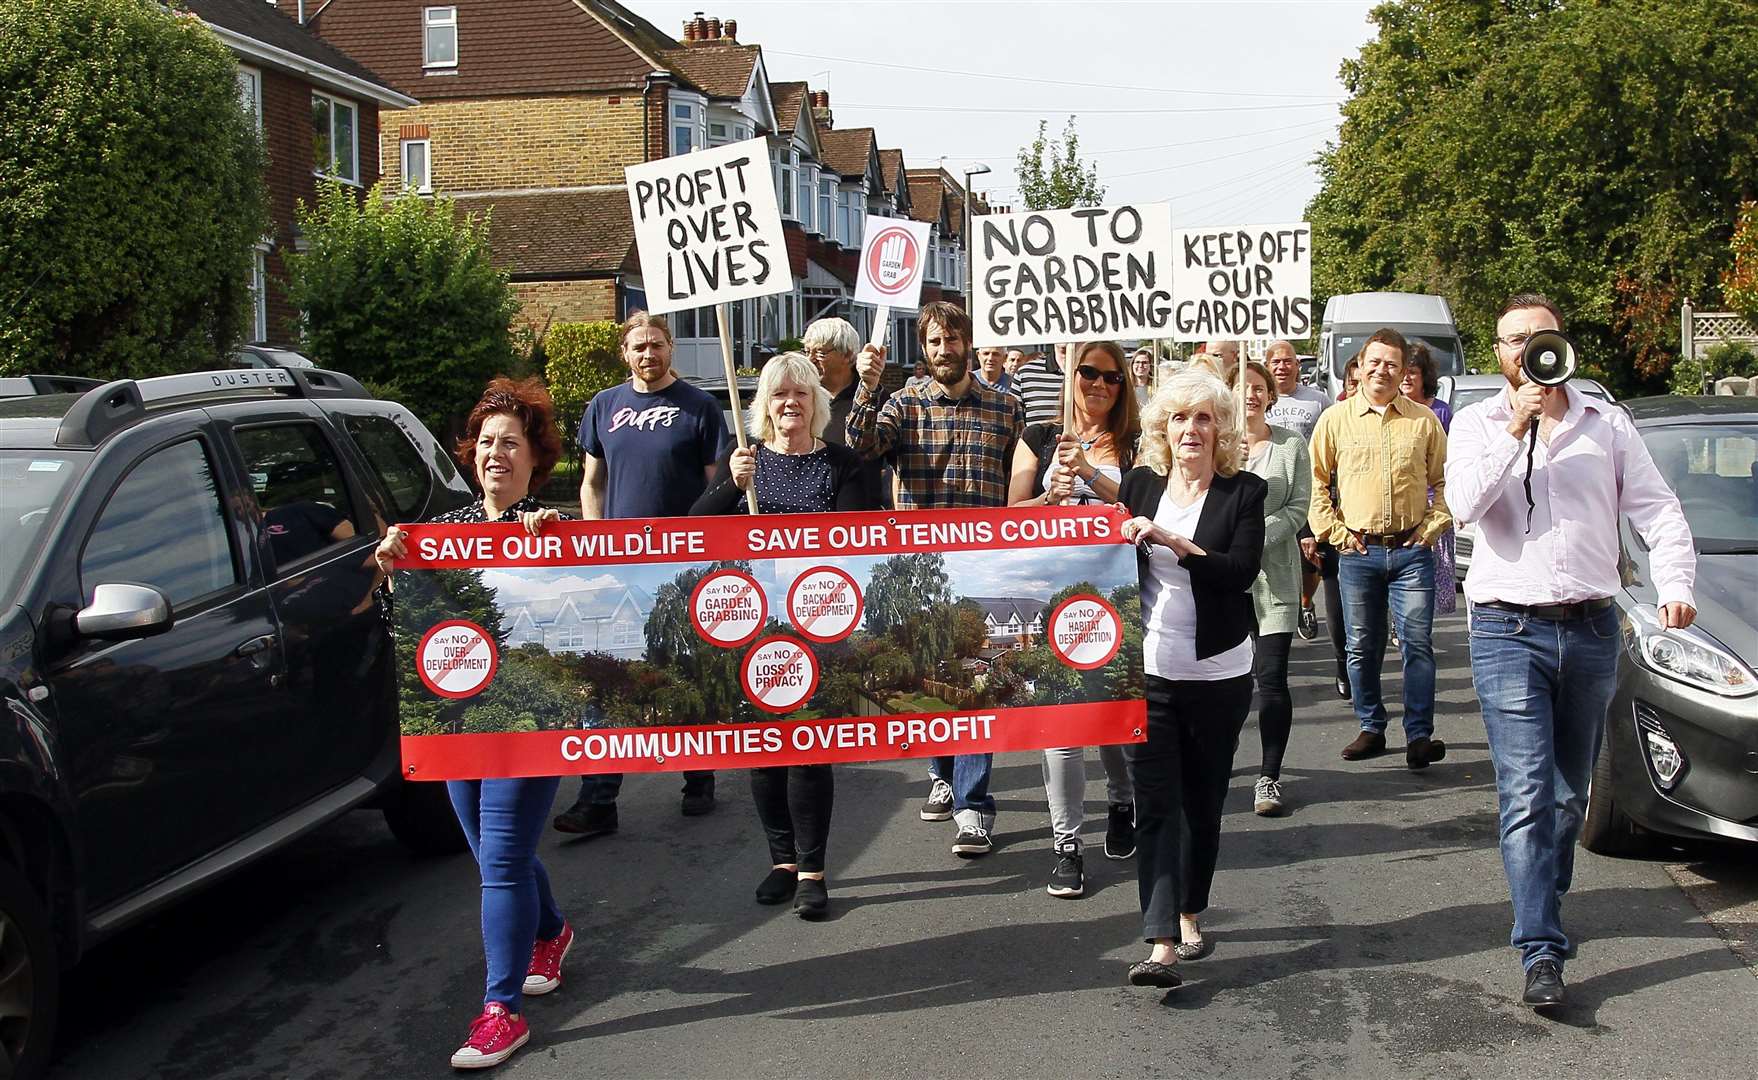 Protesters at Second Avenue have battled repeated planning applications on former tennis courts.